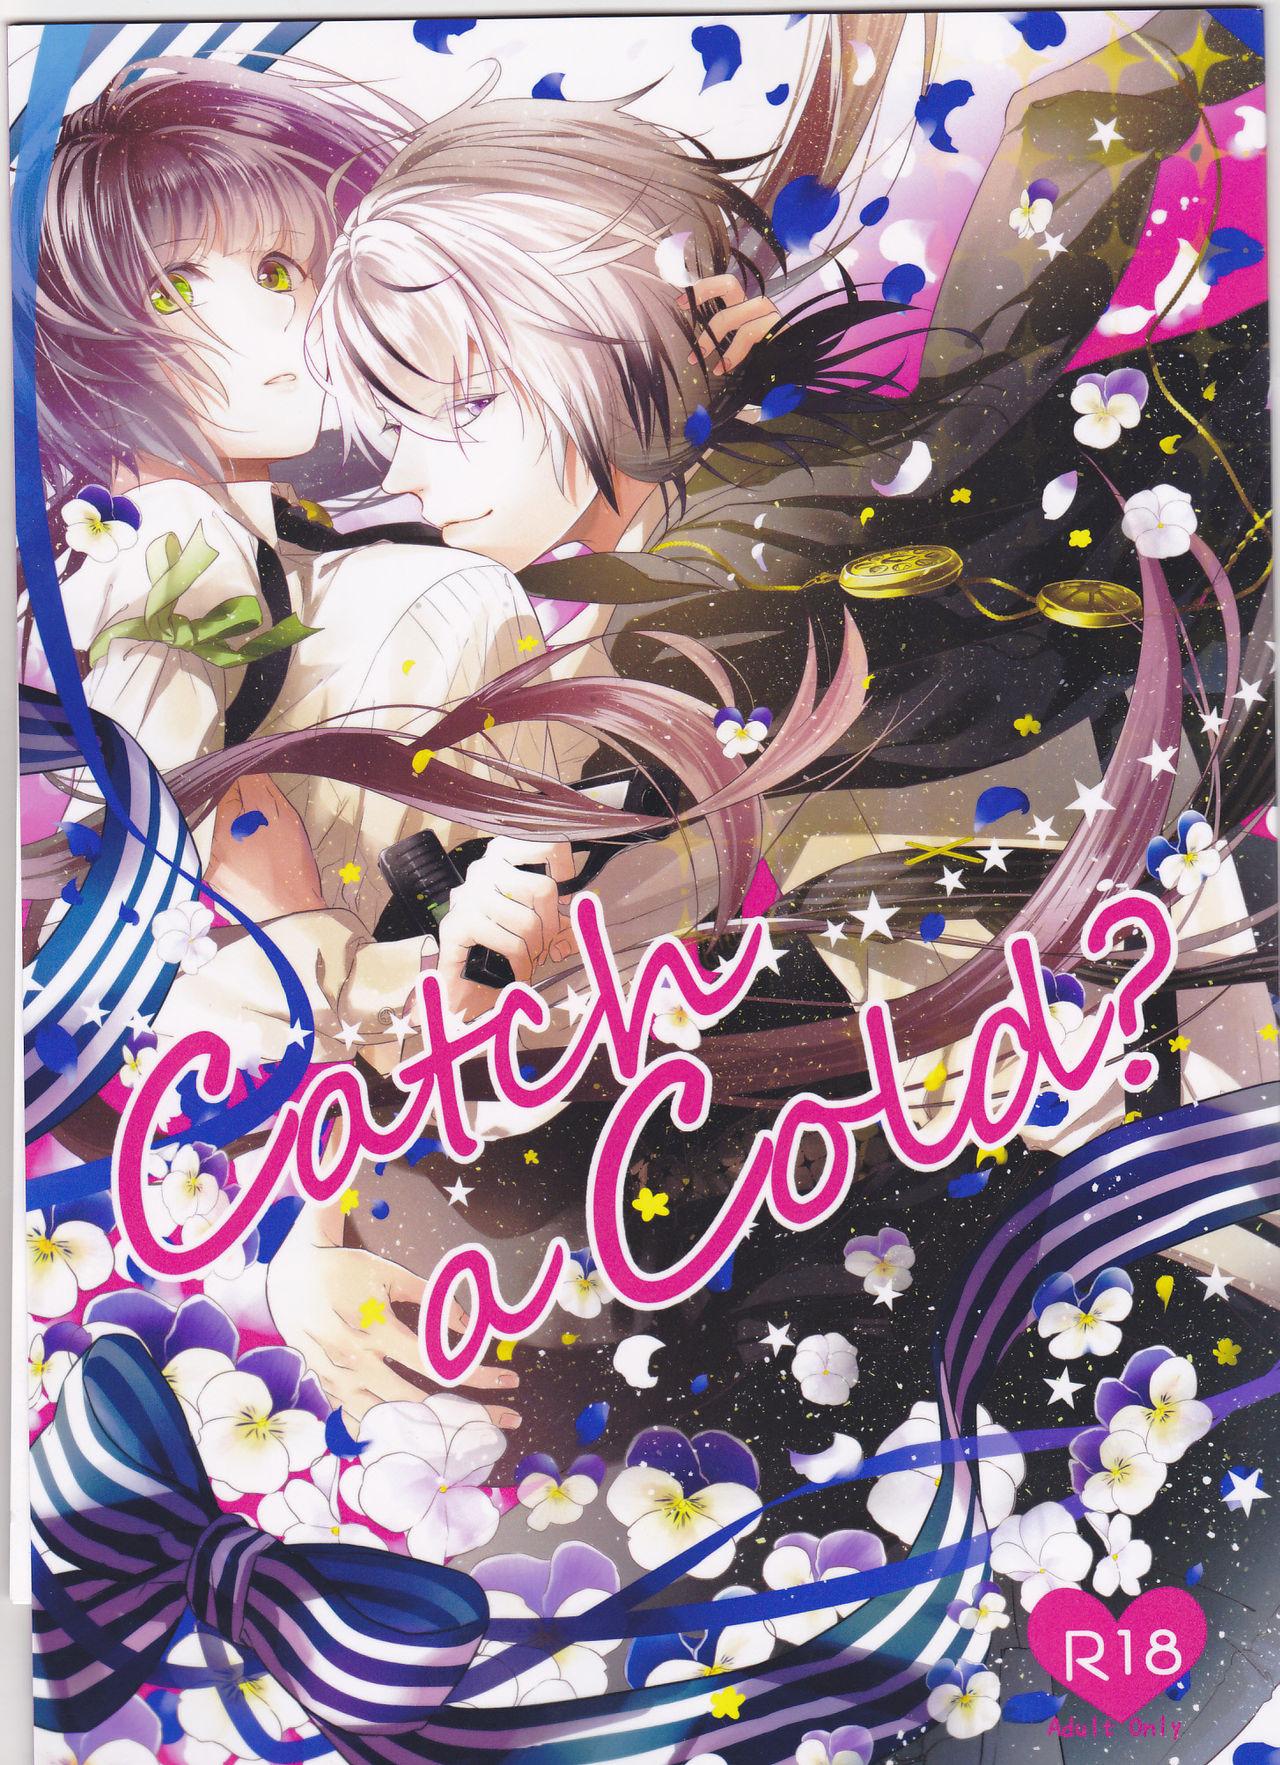 Boots Catch a Cold? - Collar x malice Kink - Picture 1